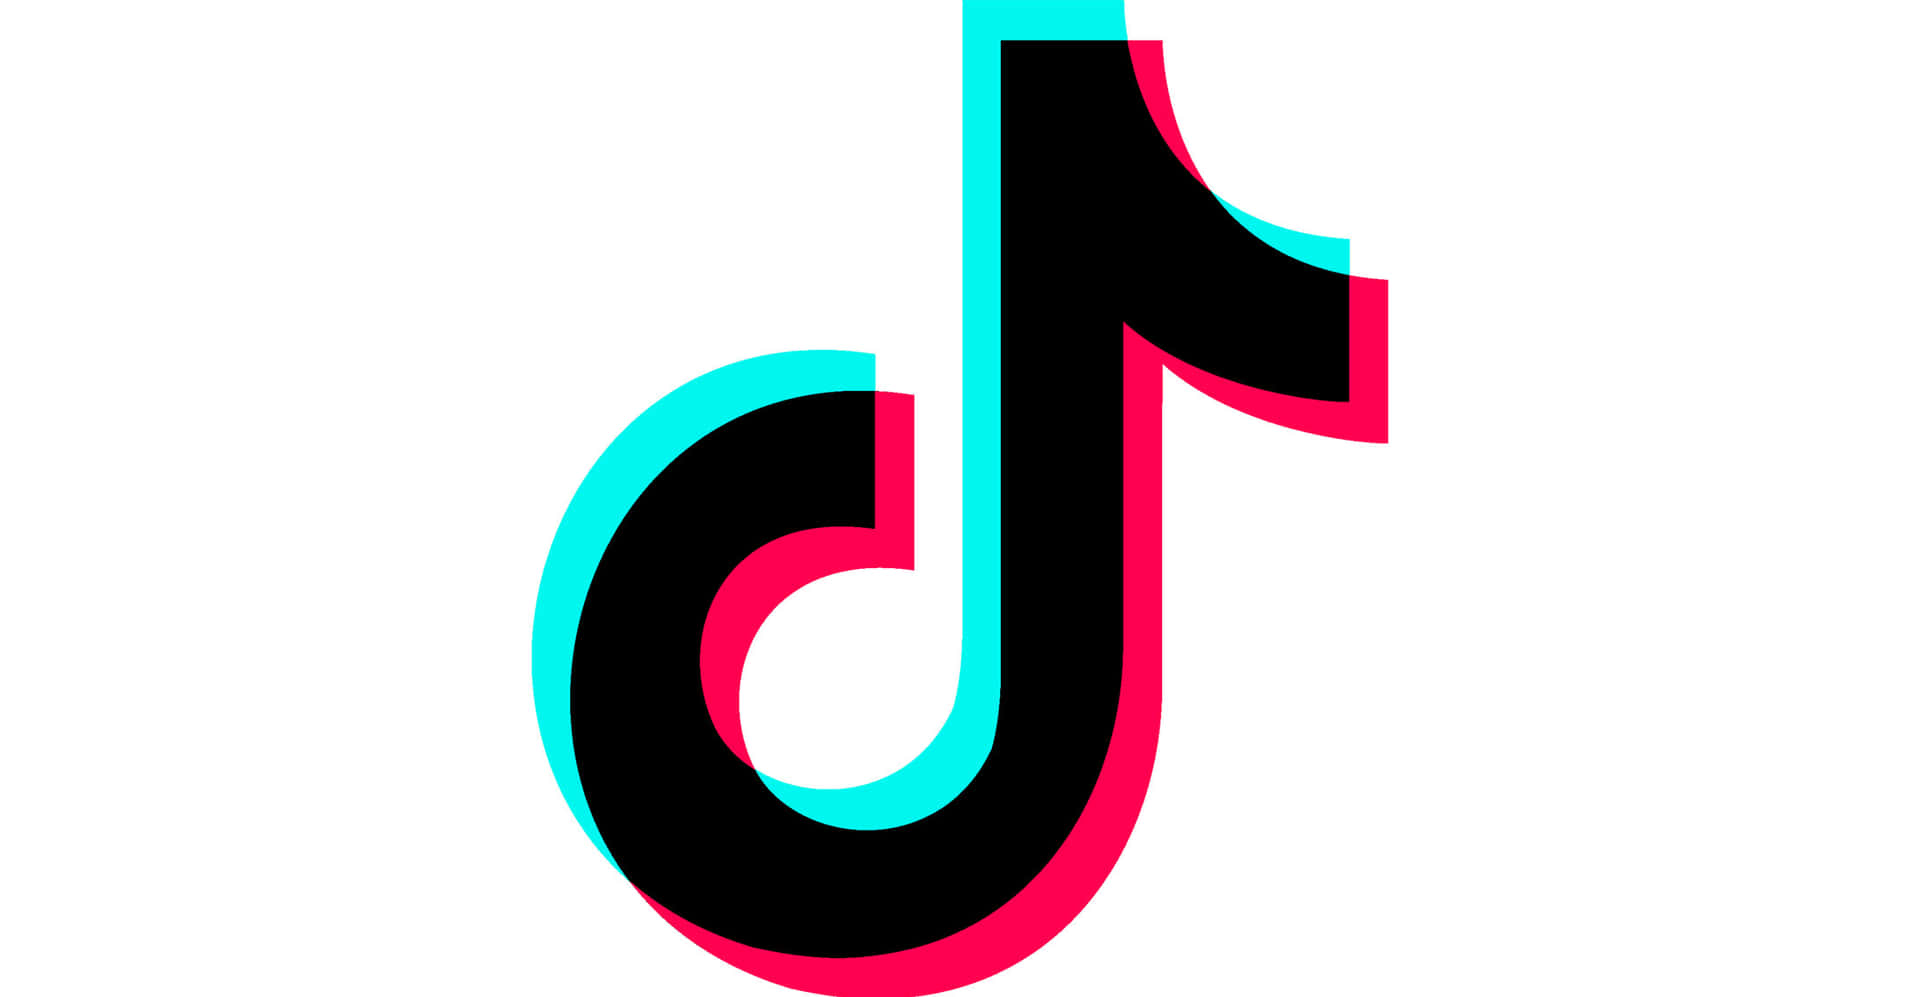 Download tiktok logo with a blue and pink color | Wallpapers.com